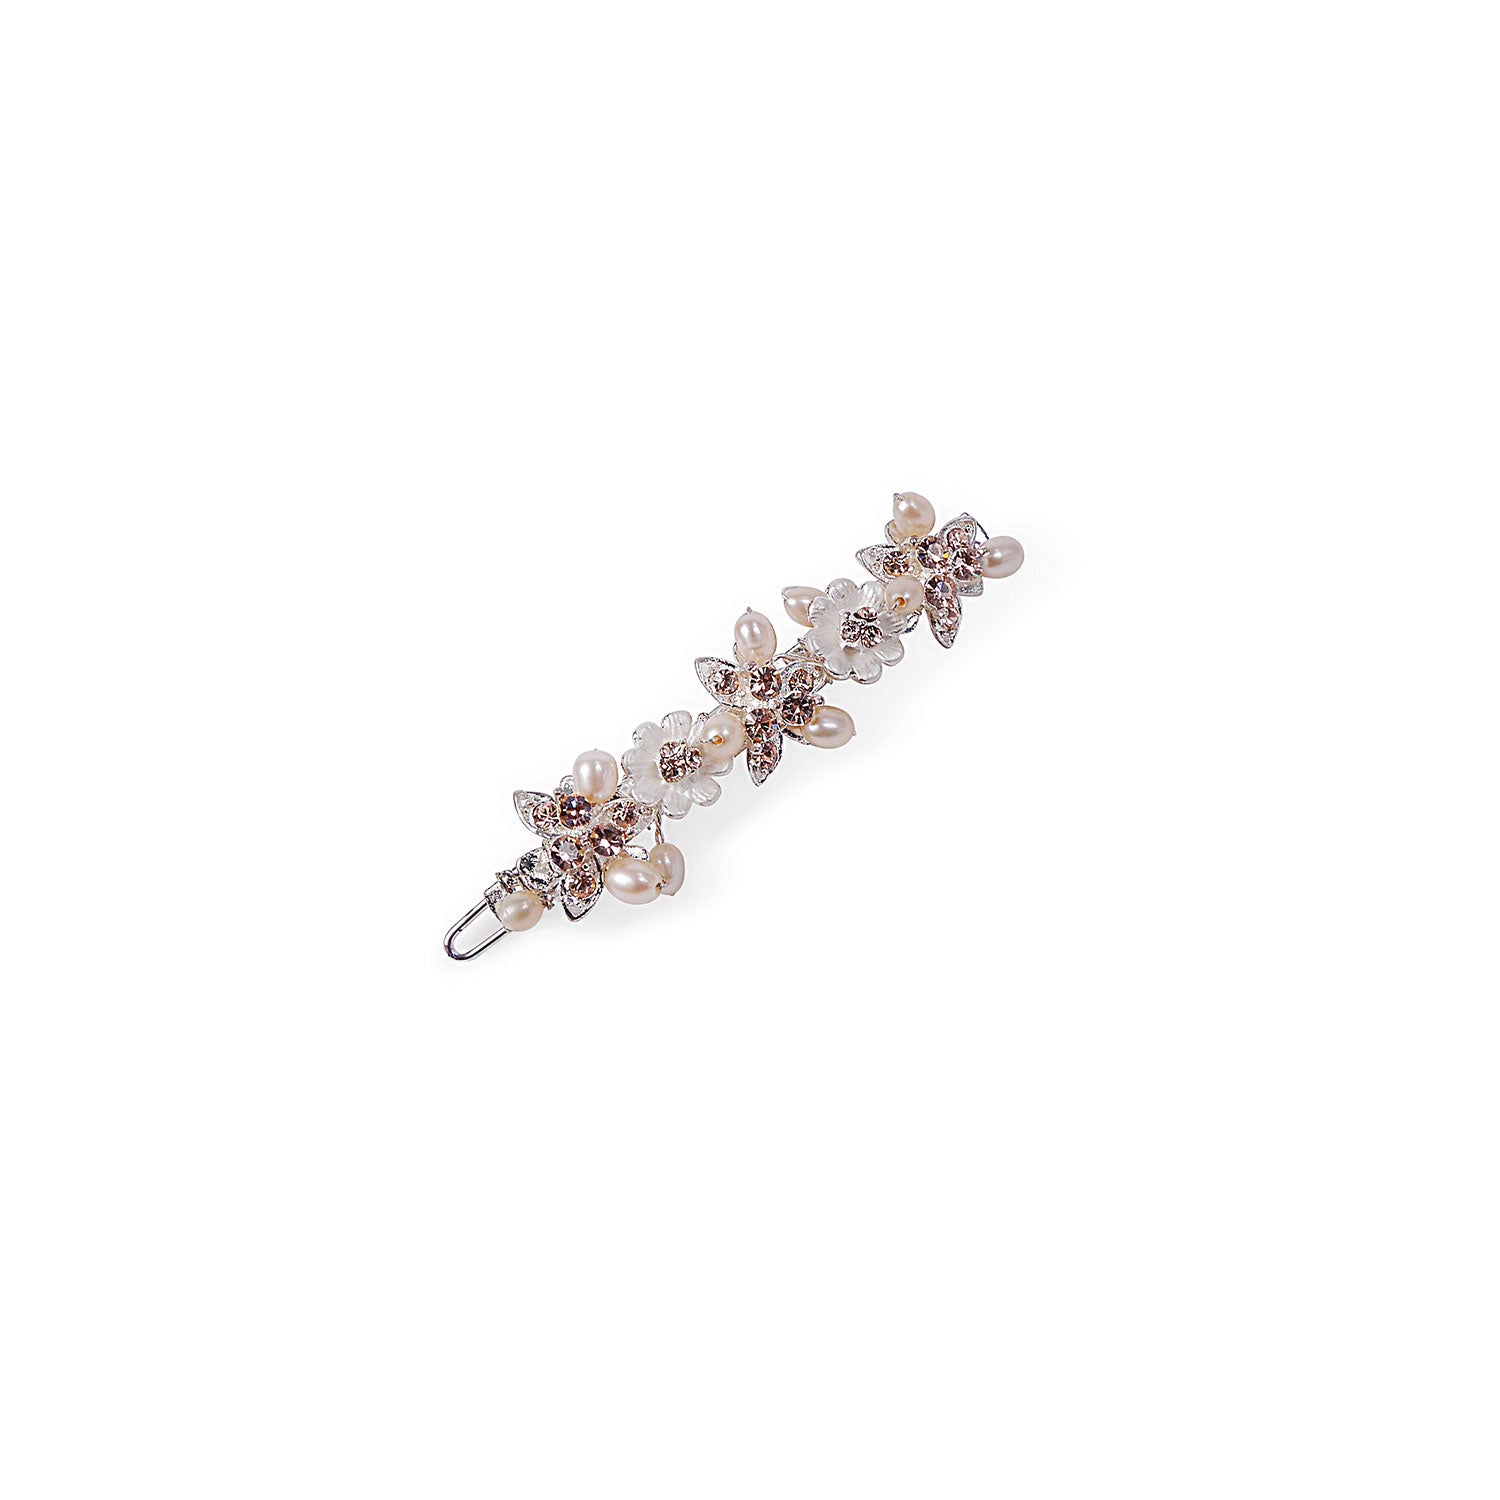 Cleo Hair Clip in Pearl and Rhodium